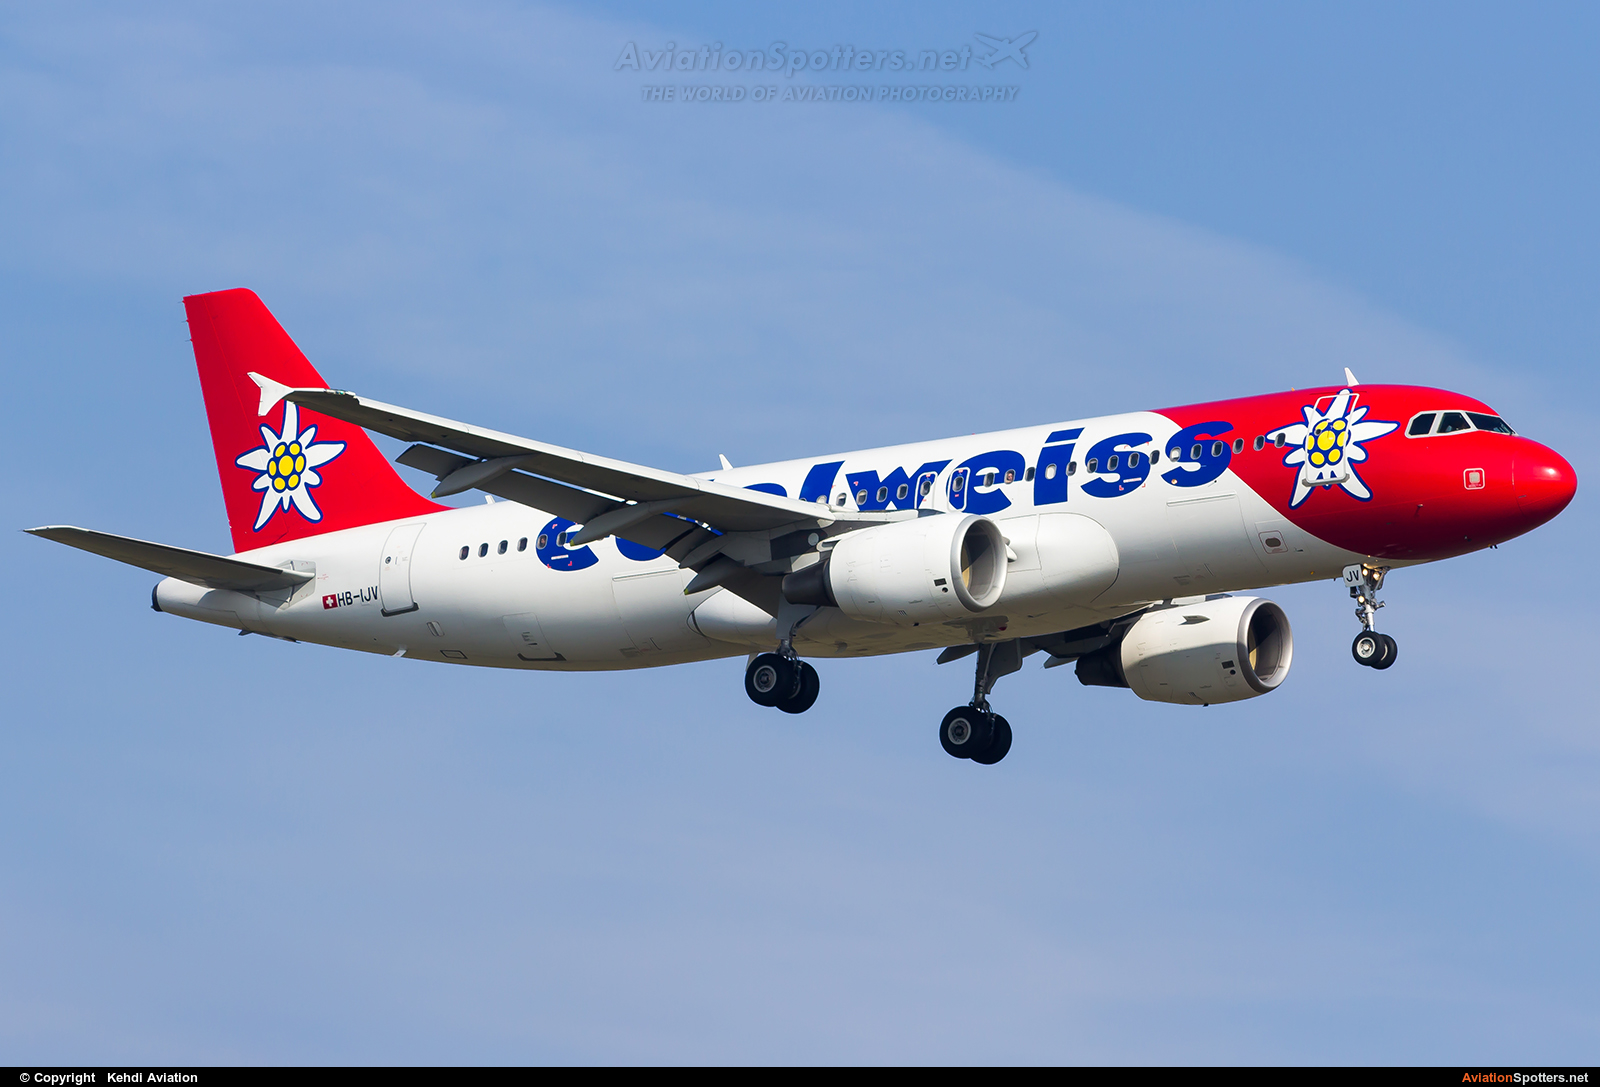 Edelweiss  -  A320  (HB-IJV) By Kehdi Aviation (Kehdi Aviation)